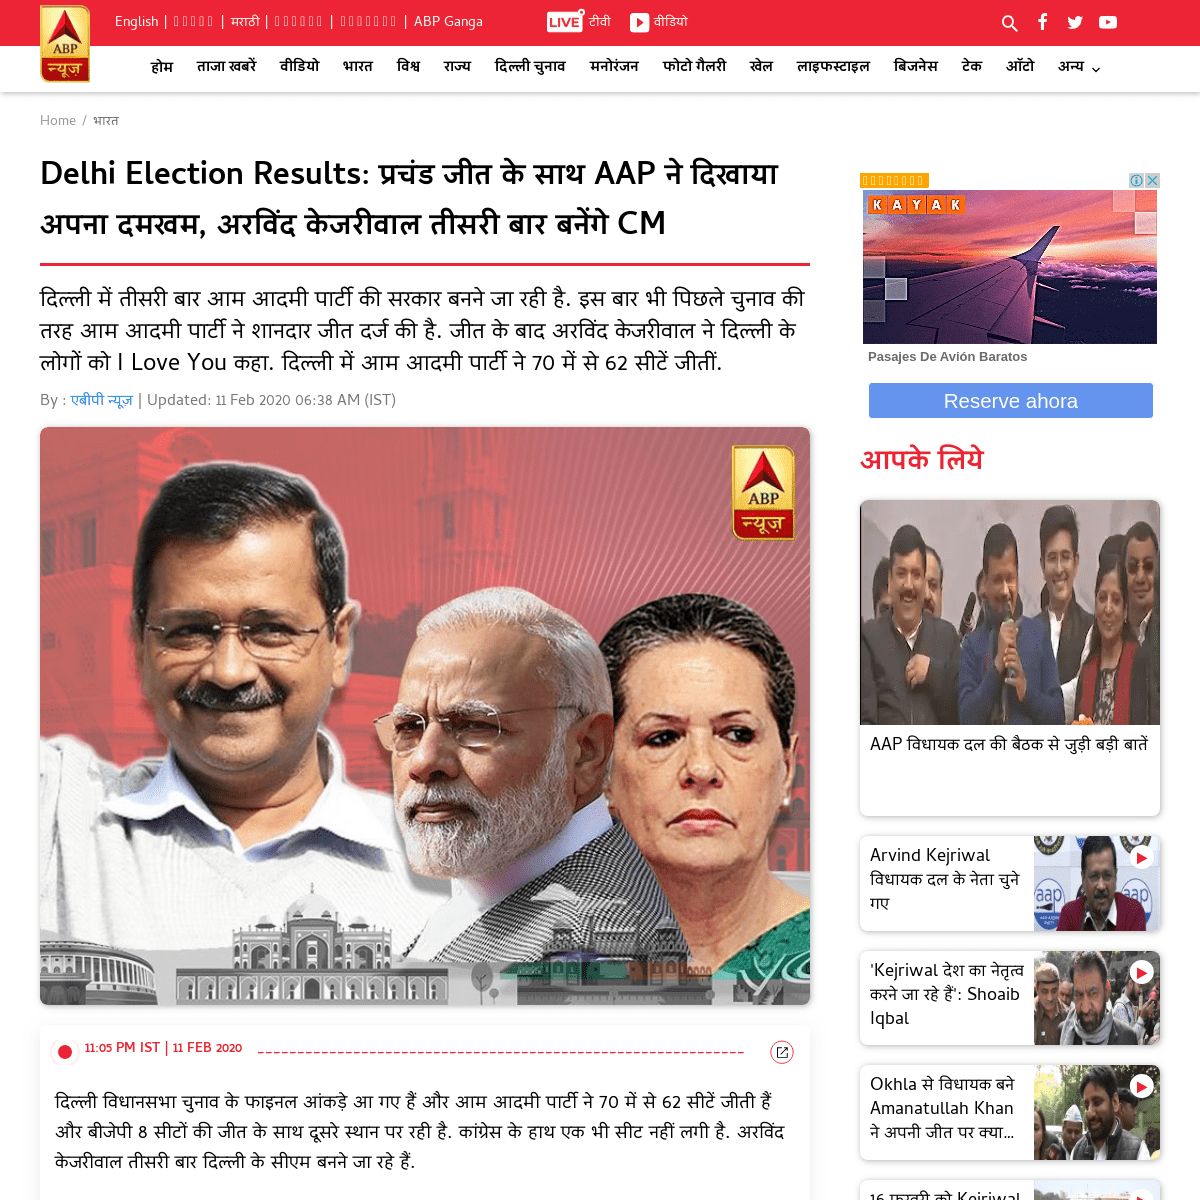 A complete backup of www.abplive.com/news/india/live-updates-delhi-election-results-2020-news-and-updates-counting-will-start-at